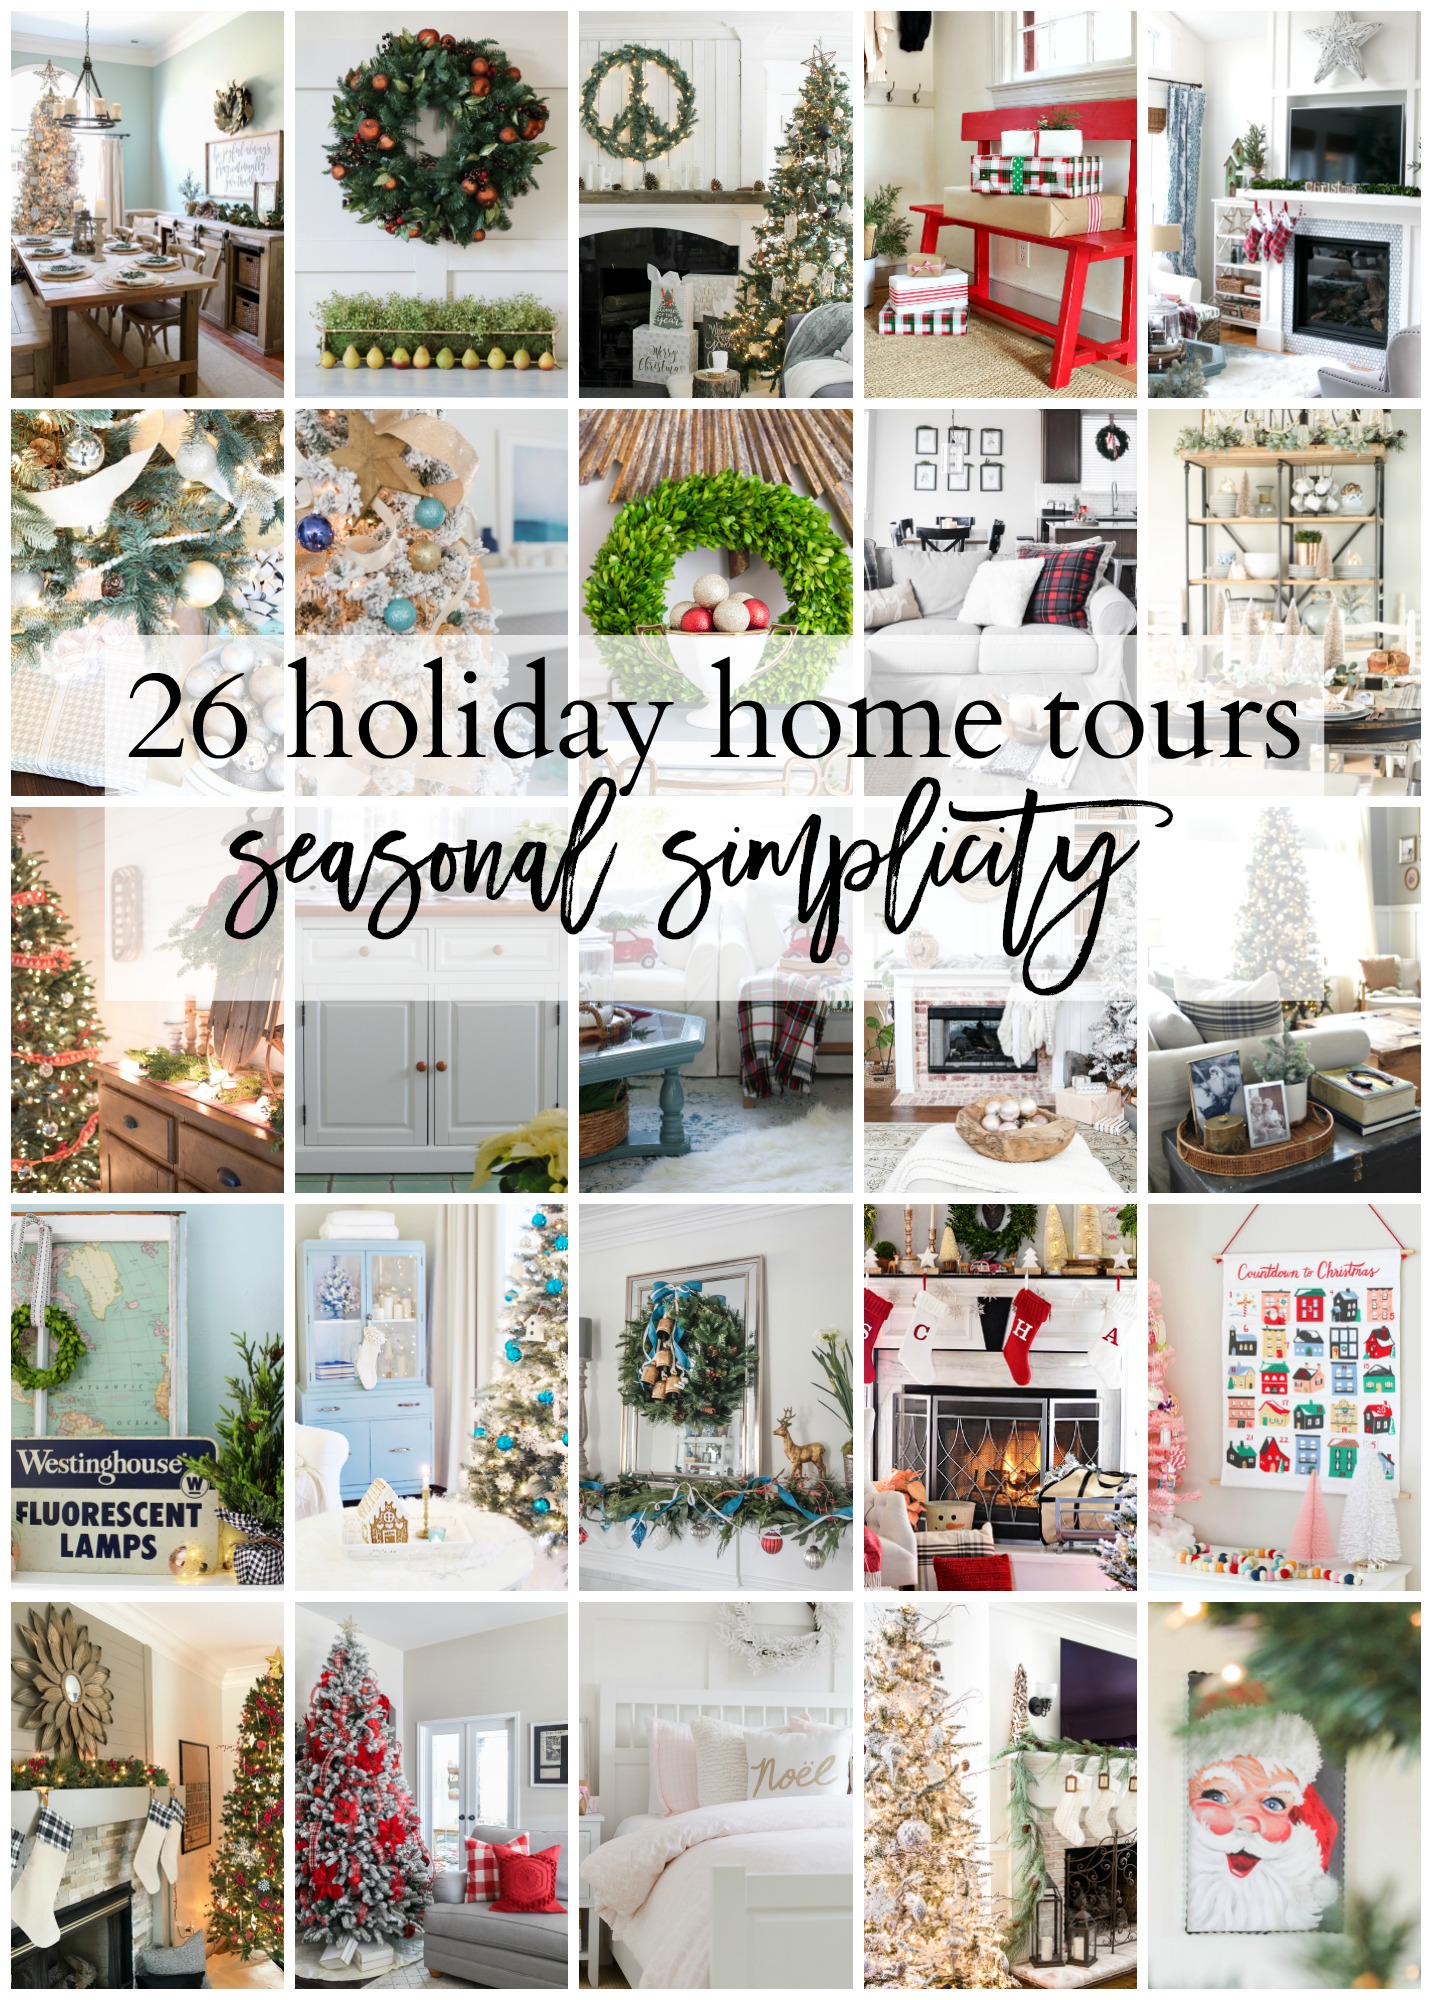 https://www.thehappyhousie.com/wp-content/uploads/2017/12/Holiday-Seasonal-Simplicity-Collage.jpg